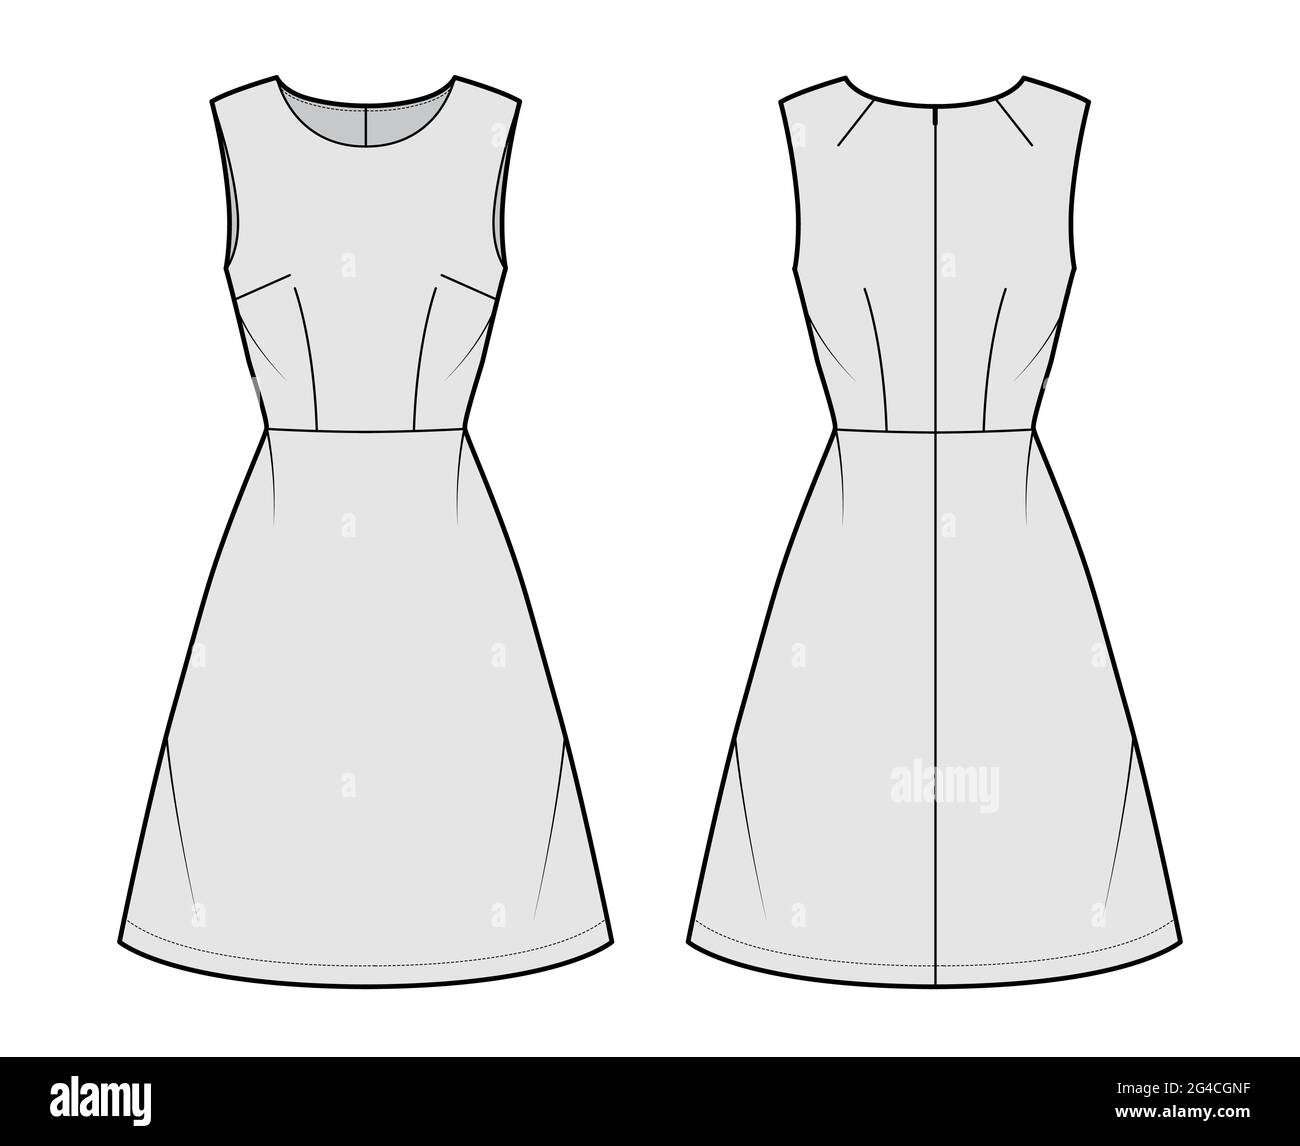 Dress A-line technical fashion illustration with sleeveless, fitted ...